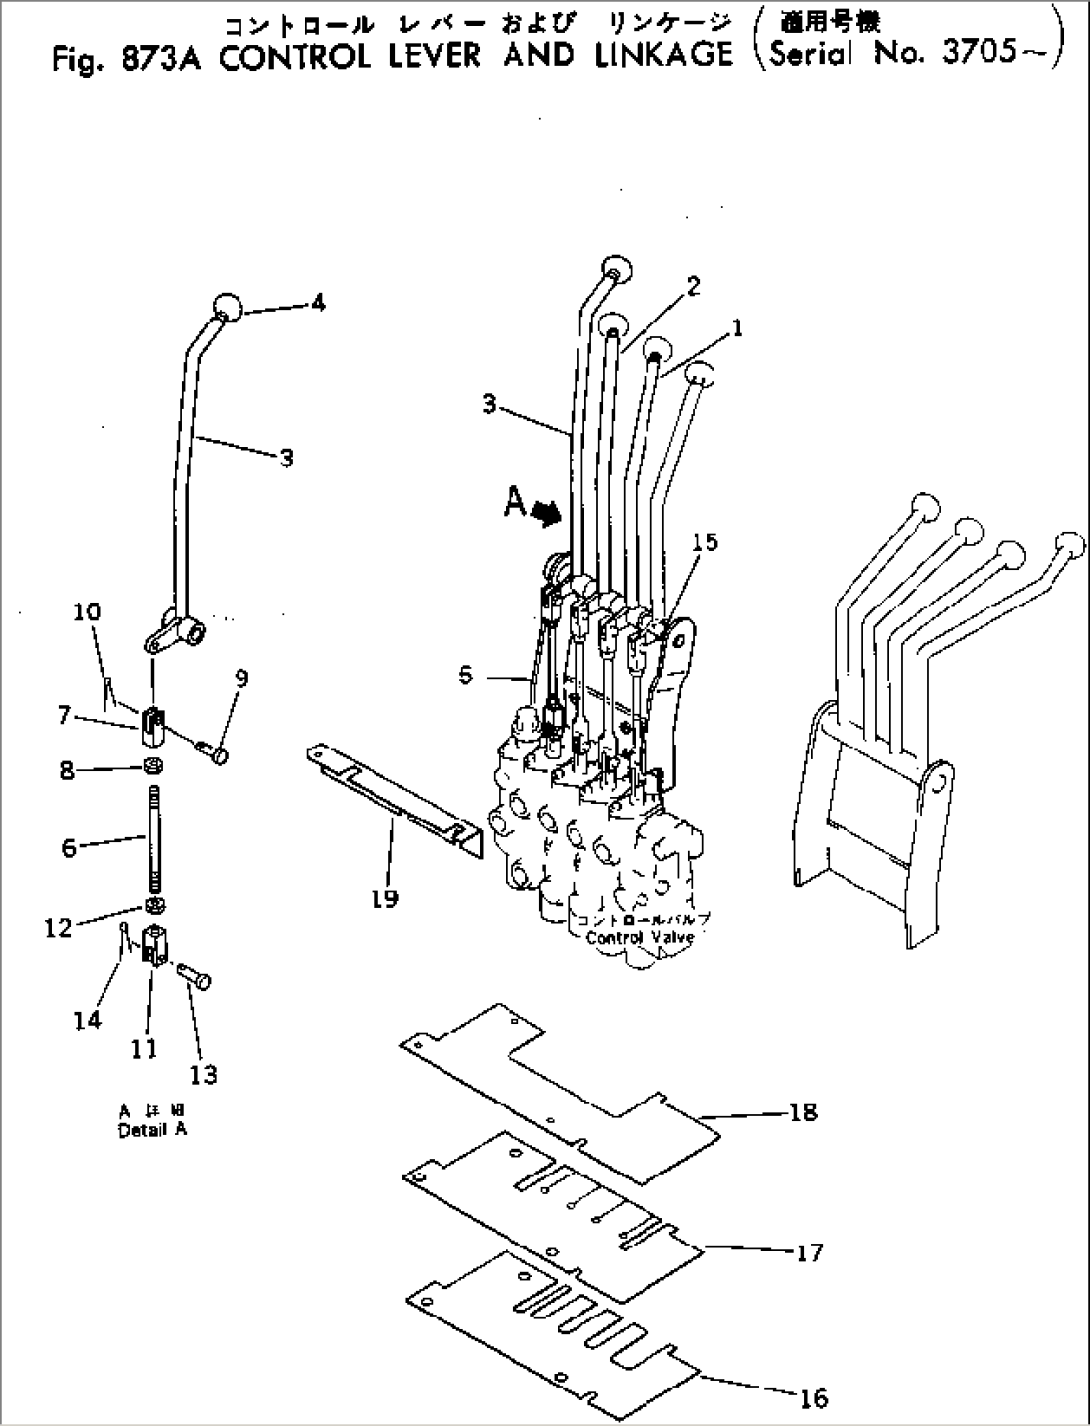 CONTROL LEVER AND LINKAGE(#3705-)